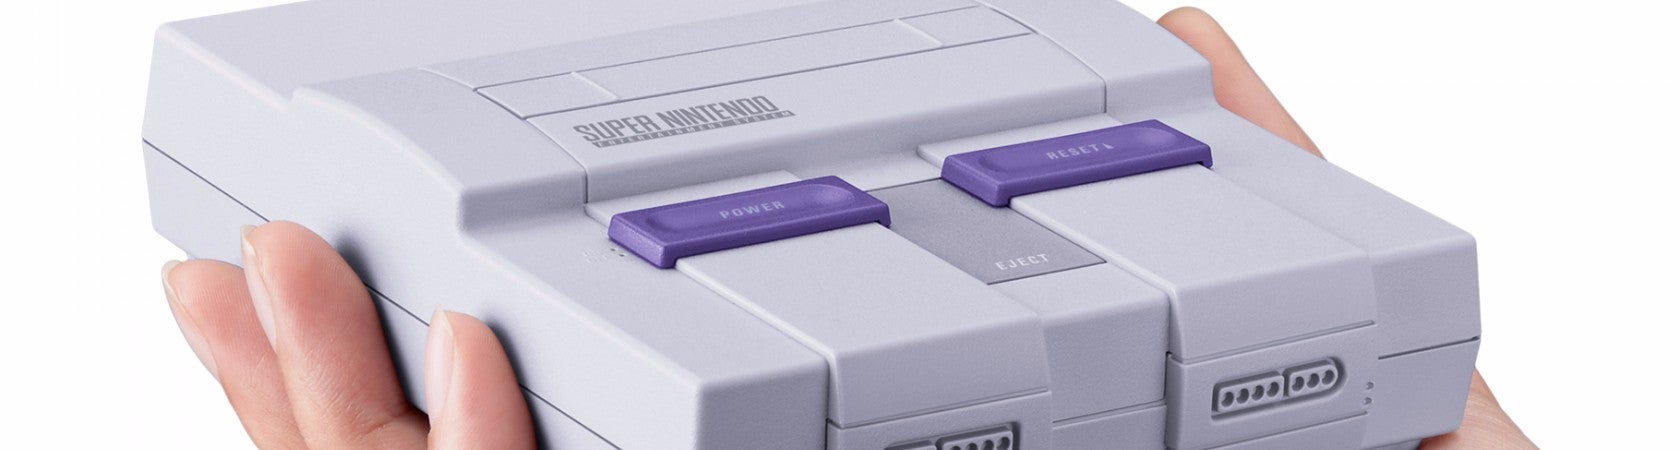 Image for SNES Classic Edition Black Friday Deals - How to Buy a SNES Classic? SNES Classic Release Date, SNES Classic Reviews, What Games are Included?